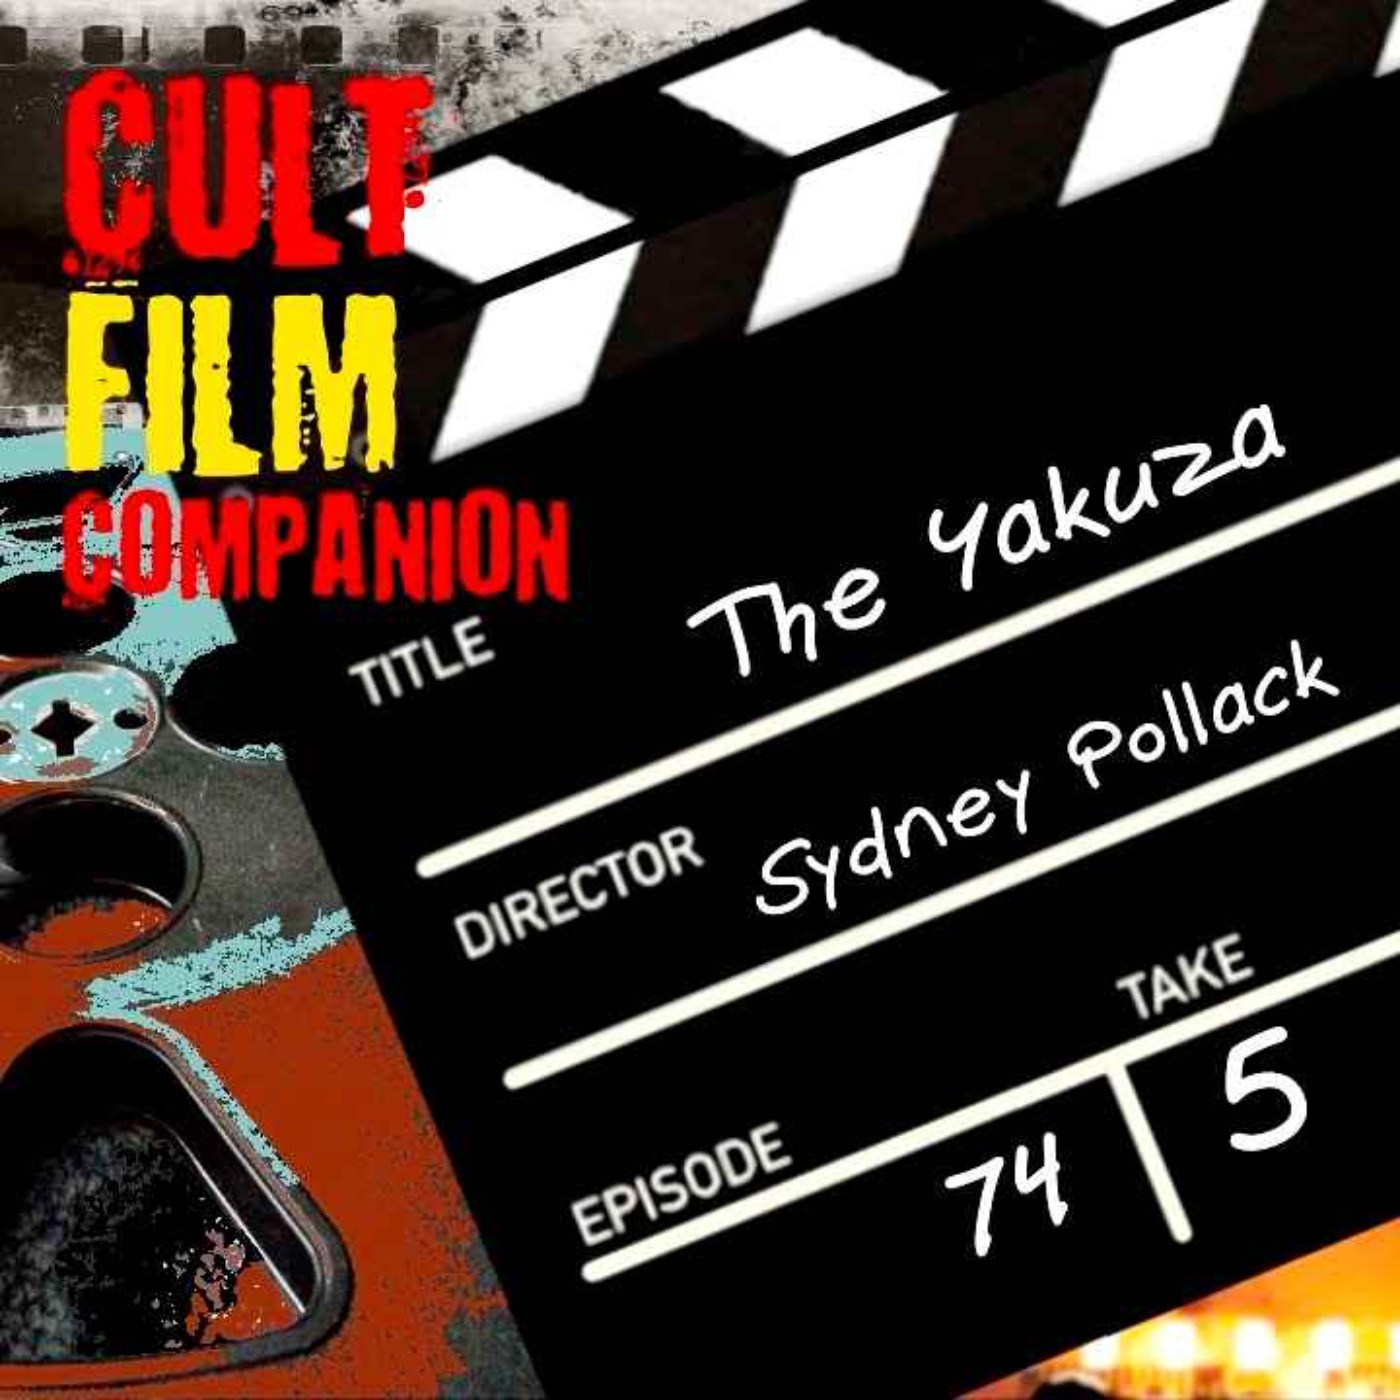 Ep. 74 The Yakuza directed by Sydney Pollack